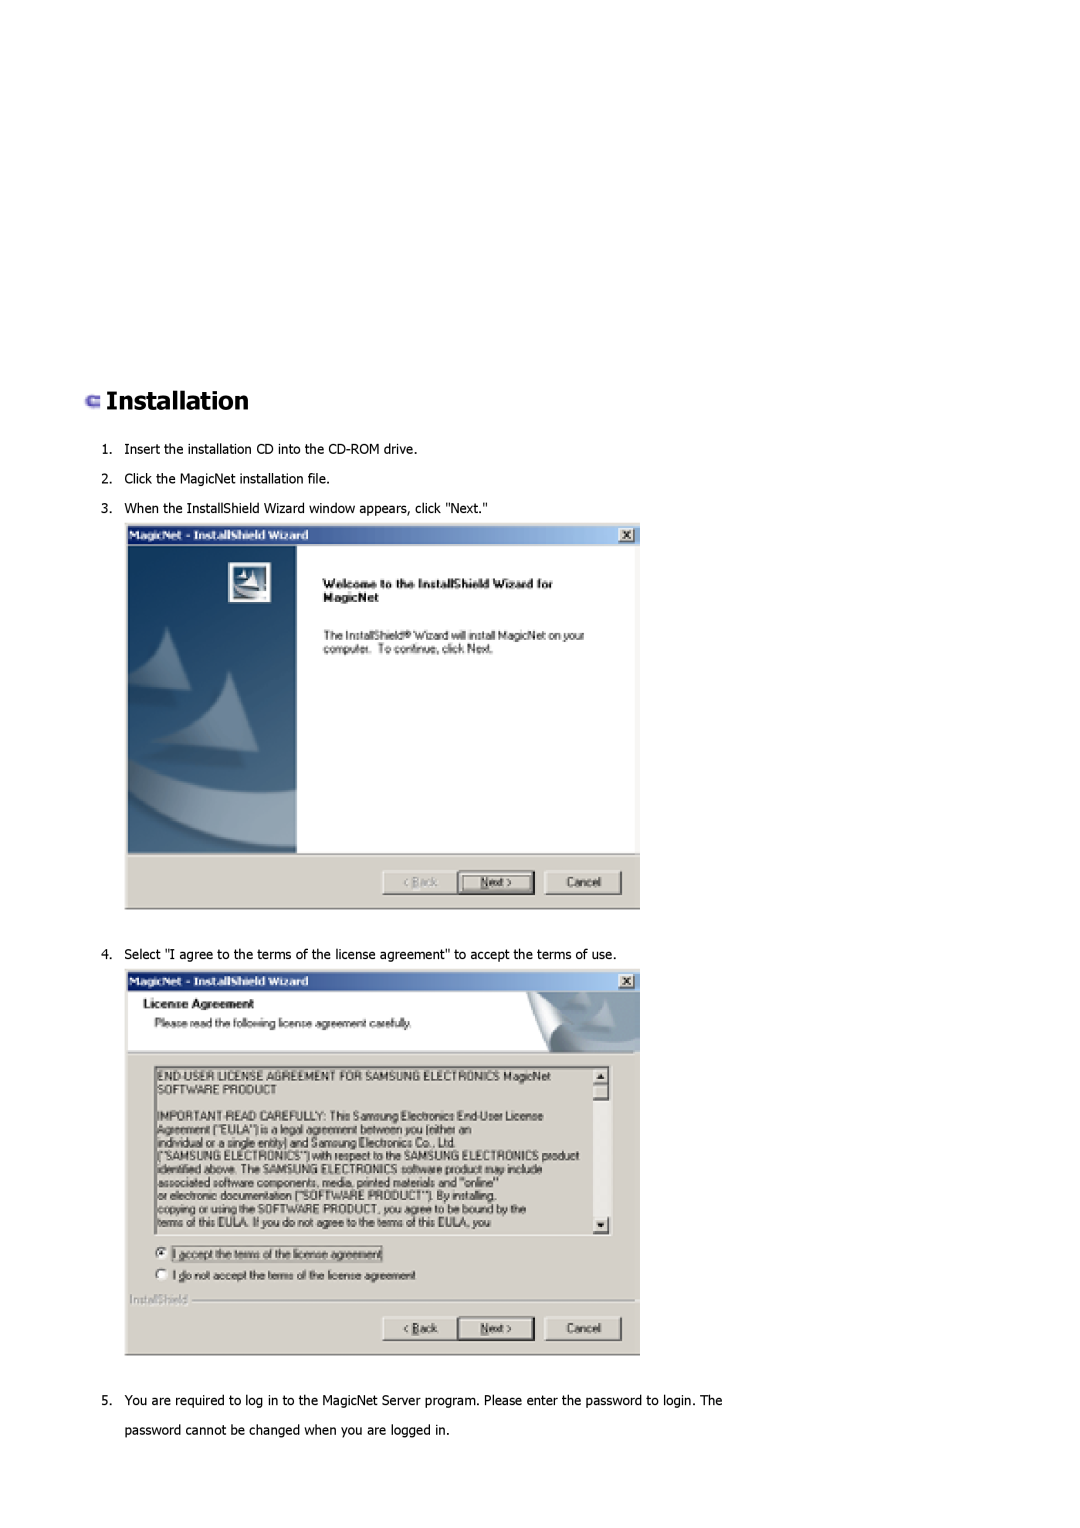 Samsung 400P manual Installation, Insert the installation CD into the CD-ROM drive, Click the MagicNet installation file 